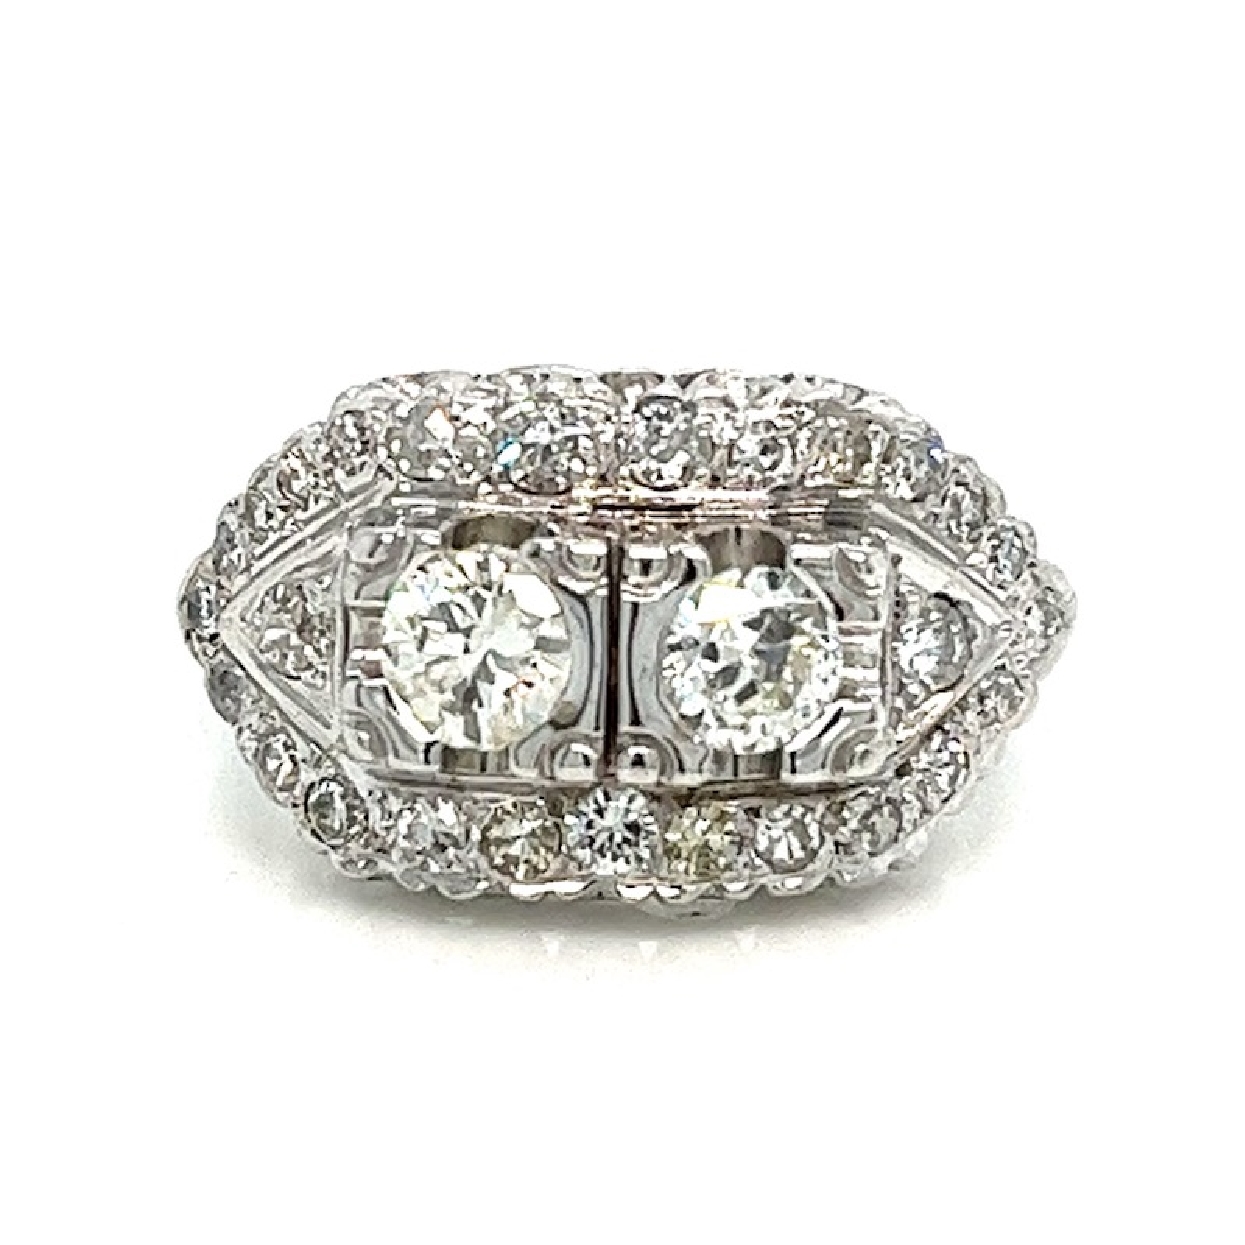 Antique Old European Cut 2-Stone .75ct Diamond Ring with 27 Accent Diamonds .66ct

Size 7.5  

AS IS- Chip in one of the Center Stones